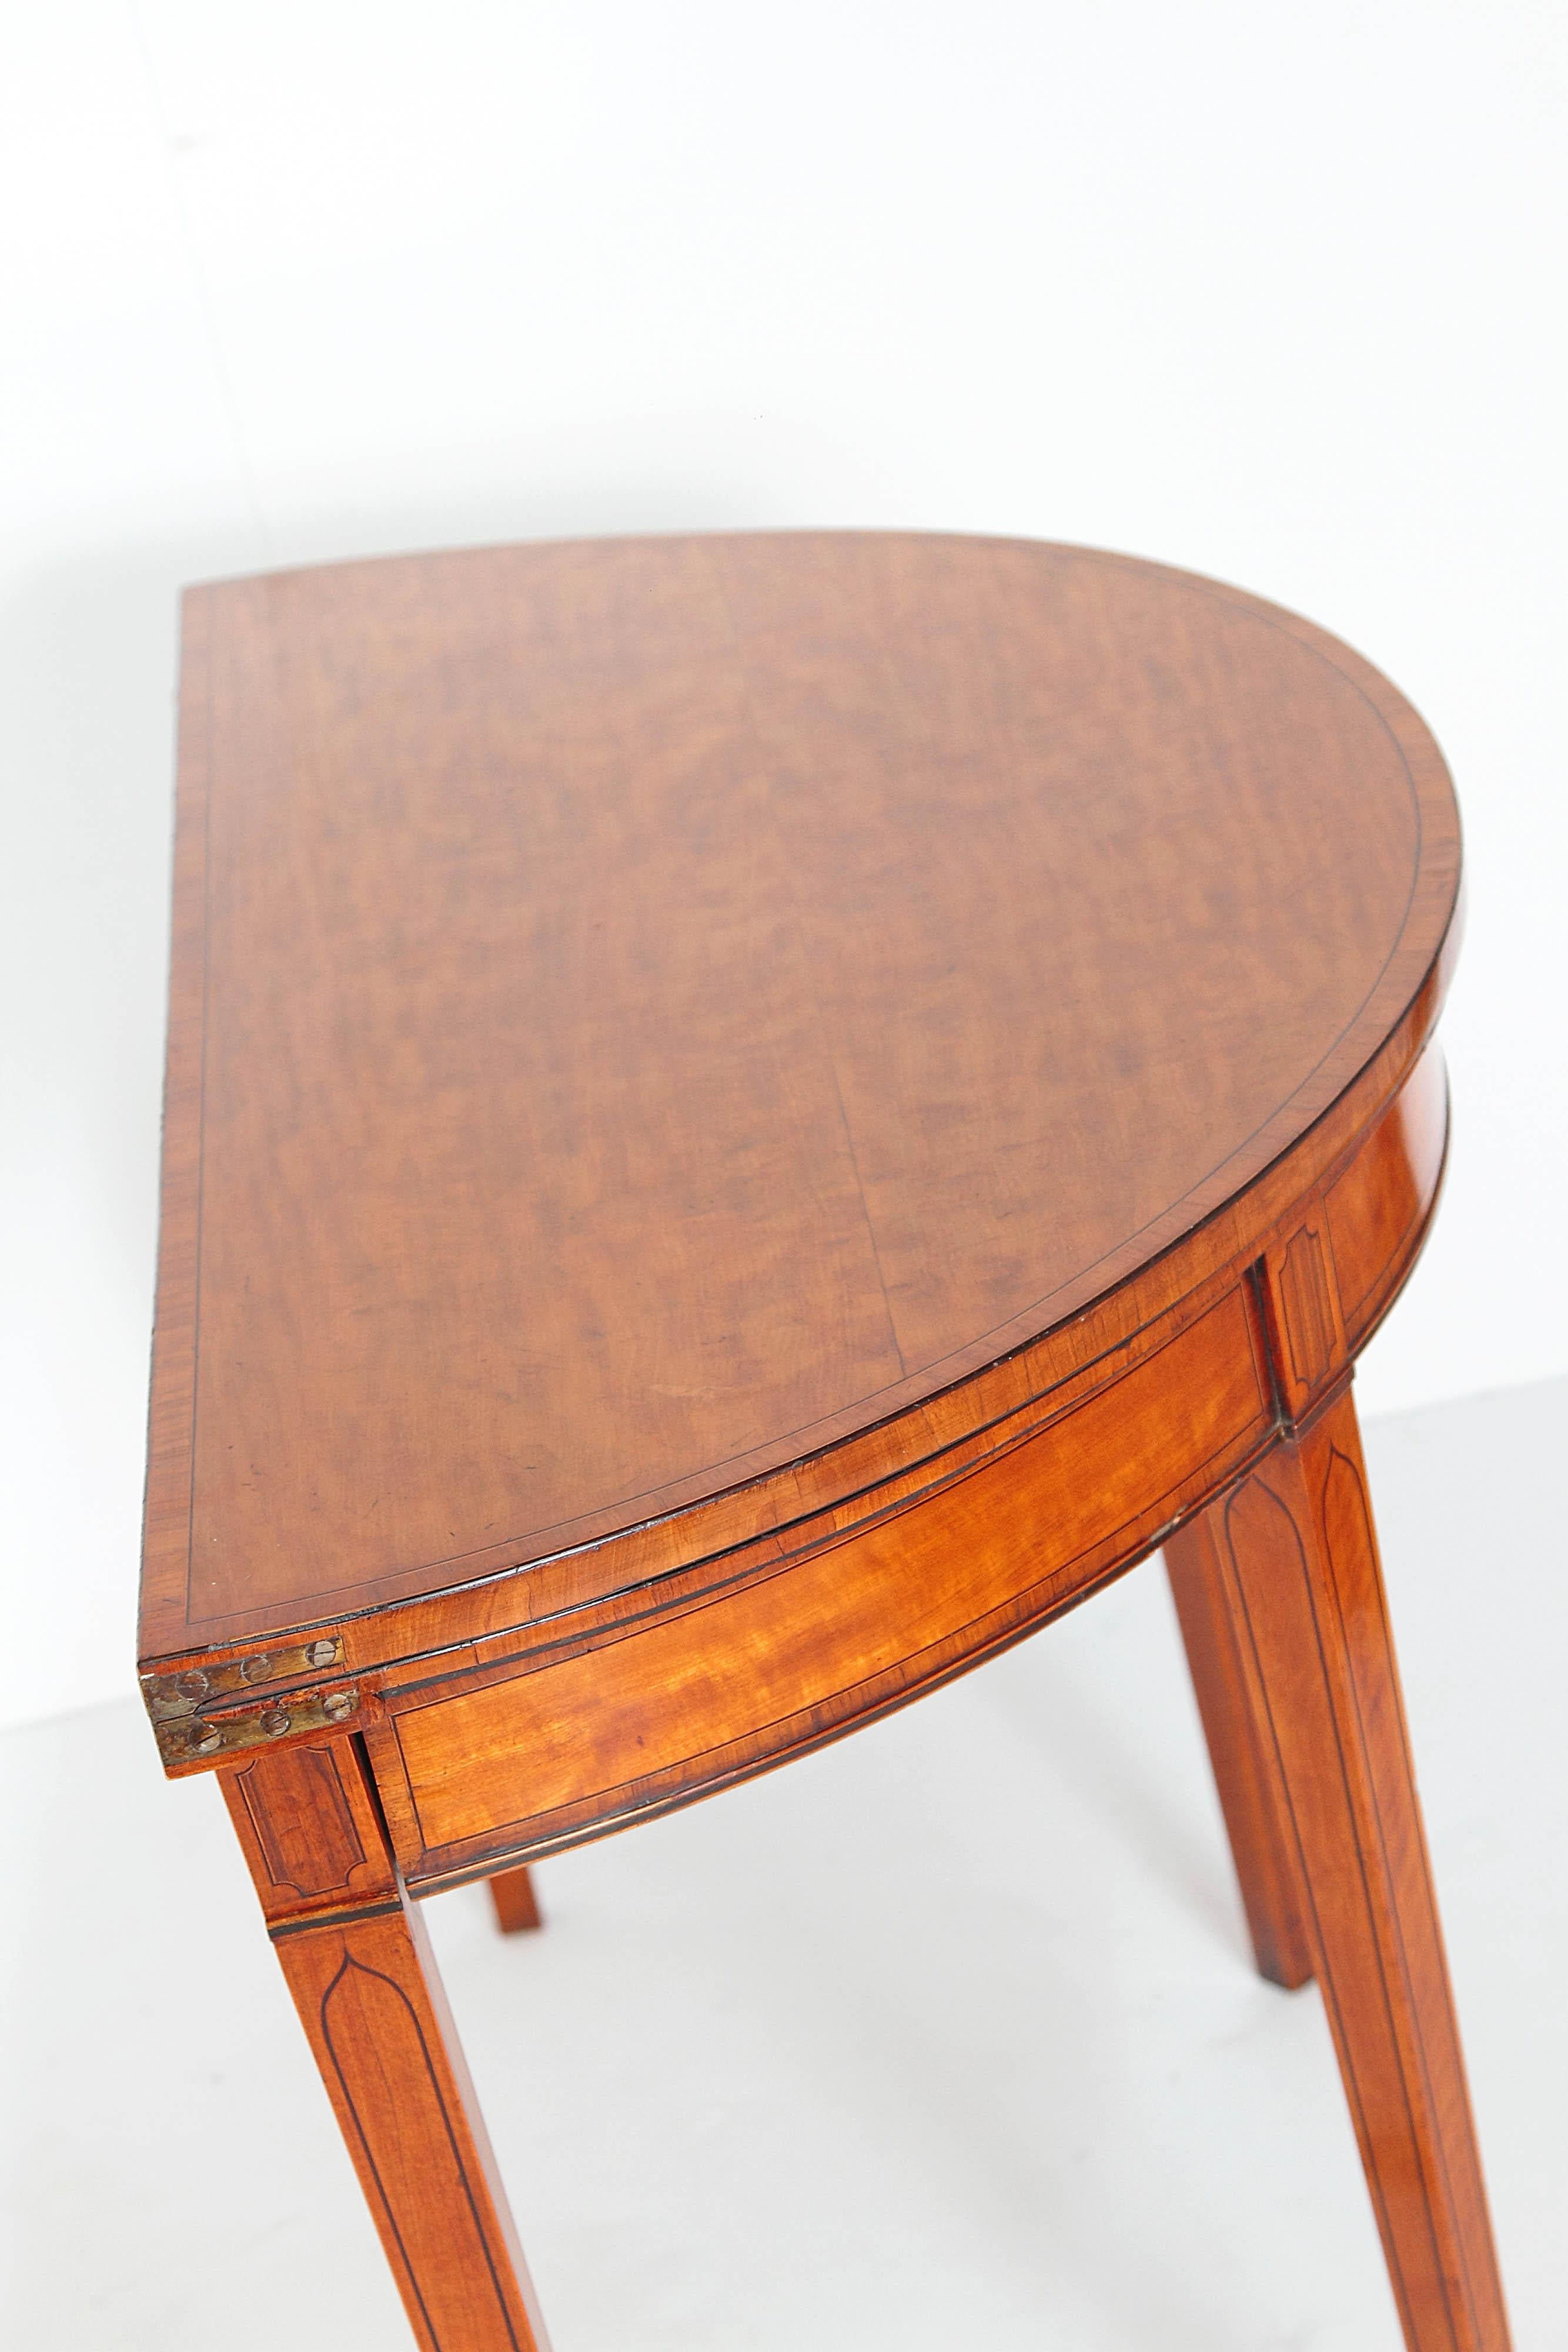 George III Demilune Games Table 1